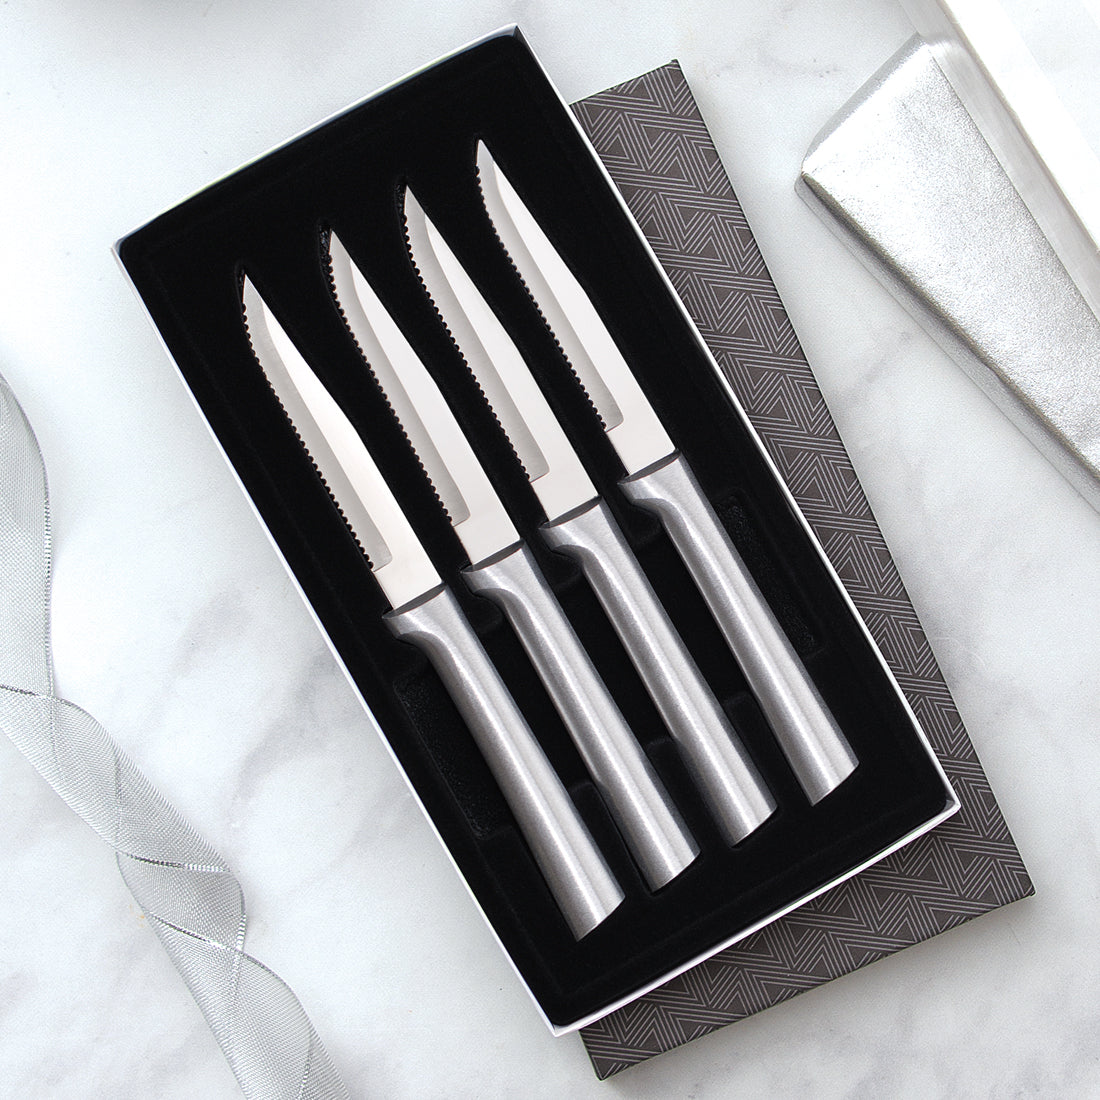 Four Serrated Steak Knives Gift Set on a marble countertop with silver ribbons